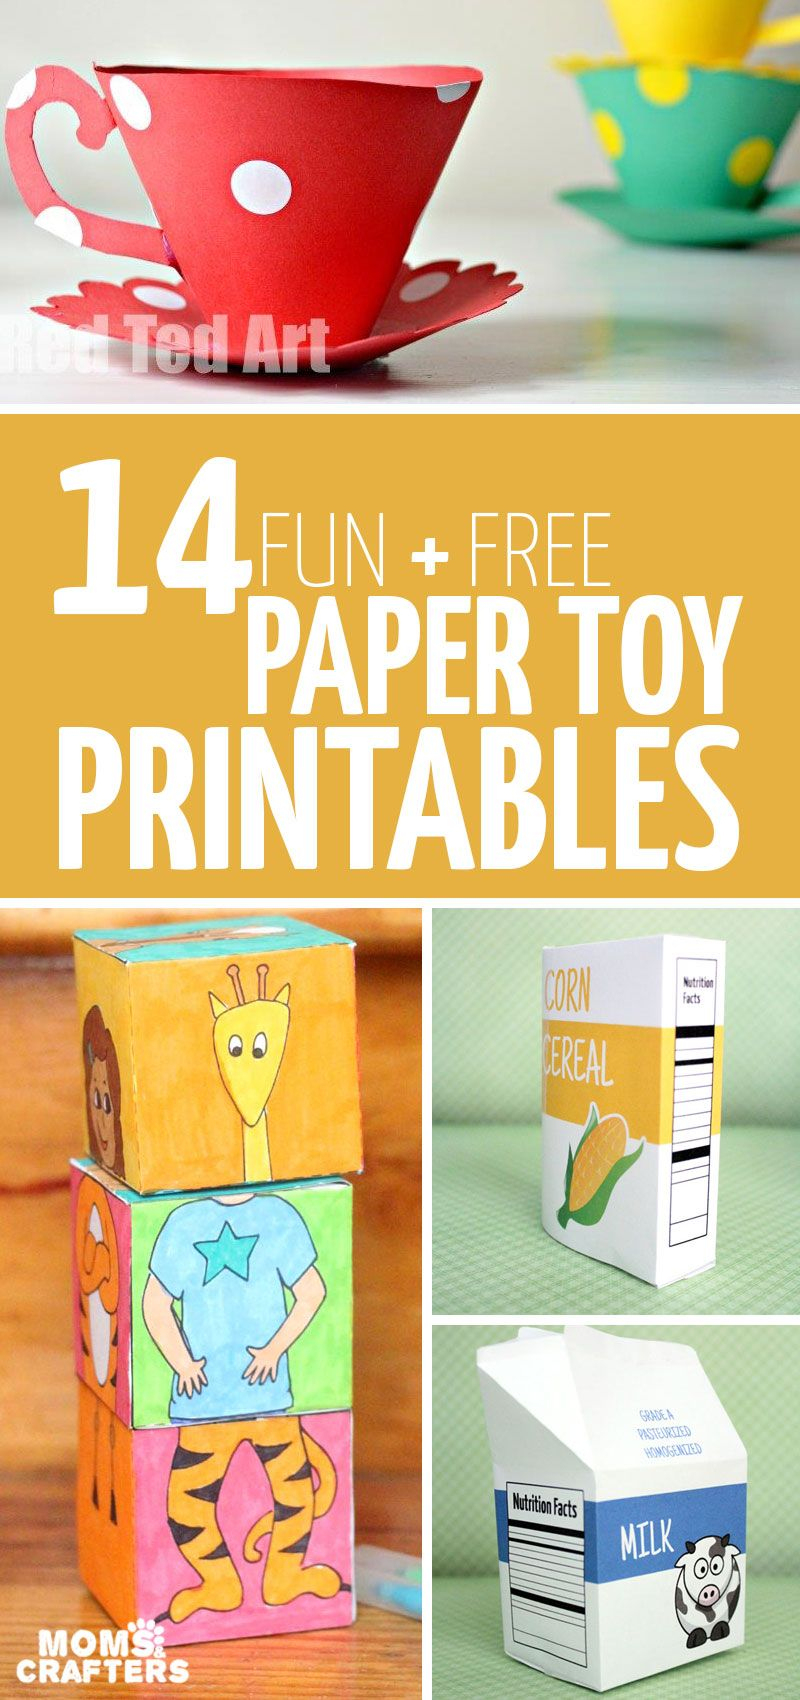 Paper Toy Templates - 14 Free Printables To Craft And Play! | Paper - Free Printable Paper Crafts